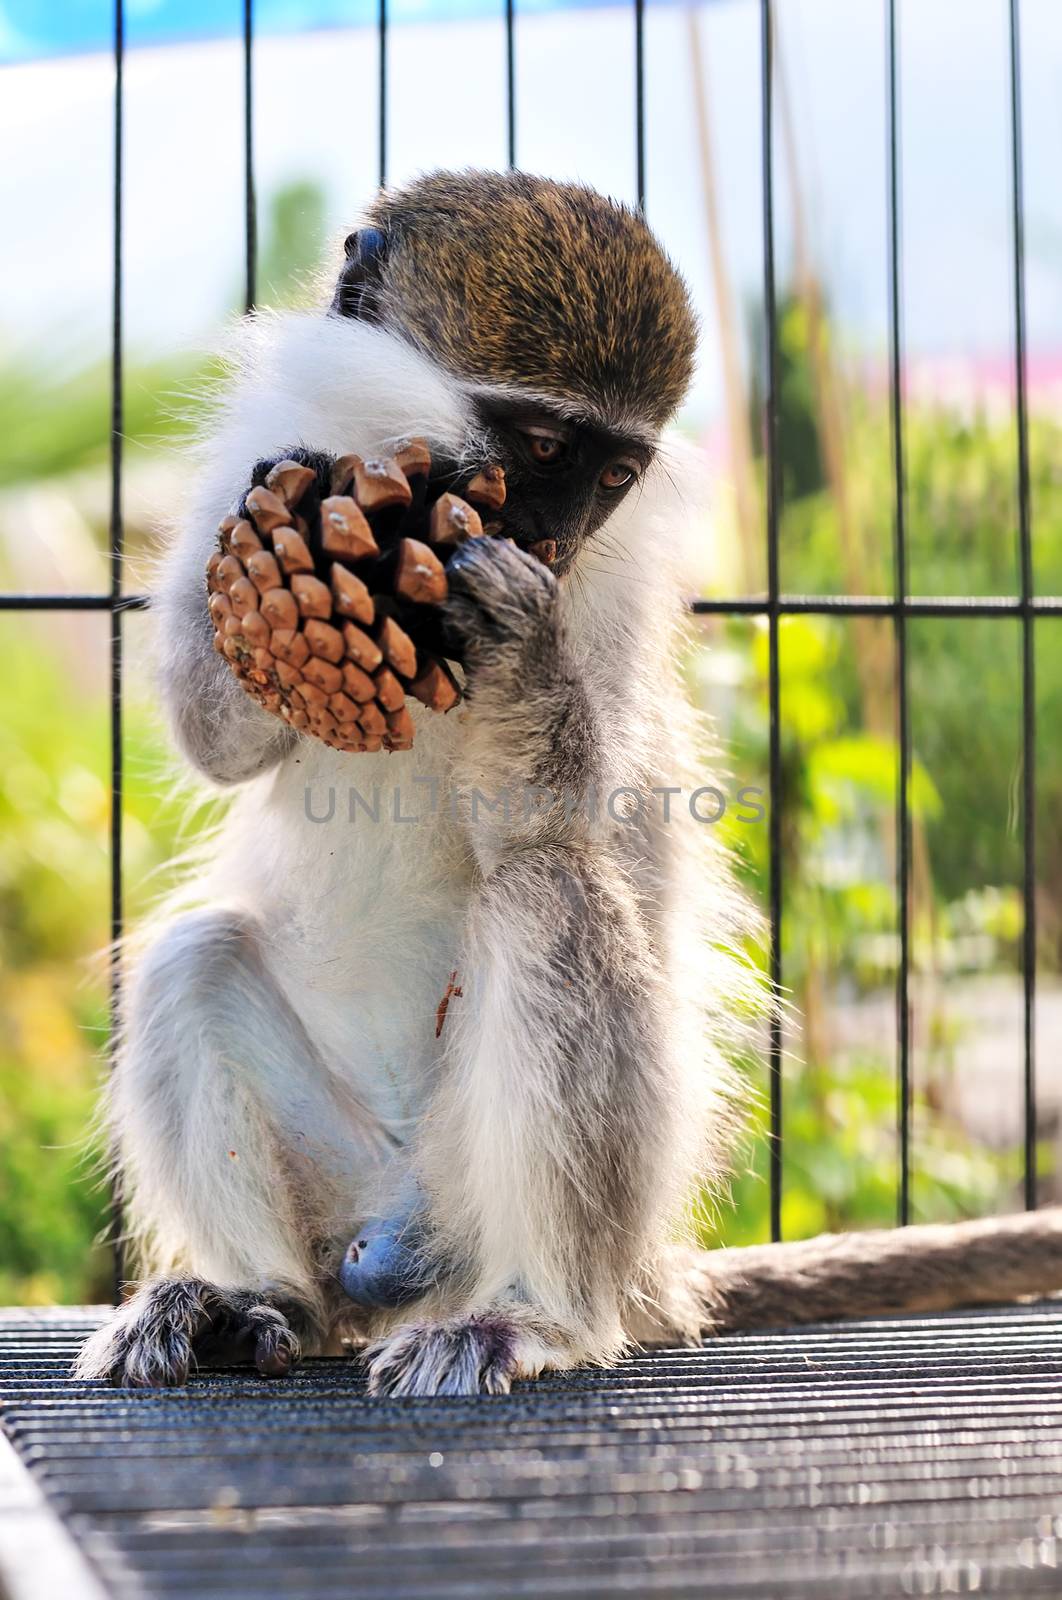 funny little monkey in the cage eating nuts